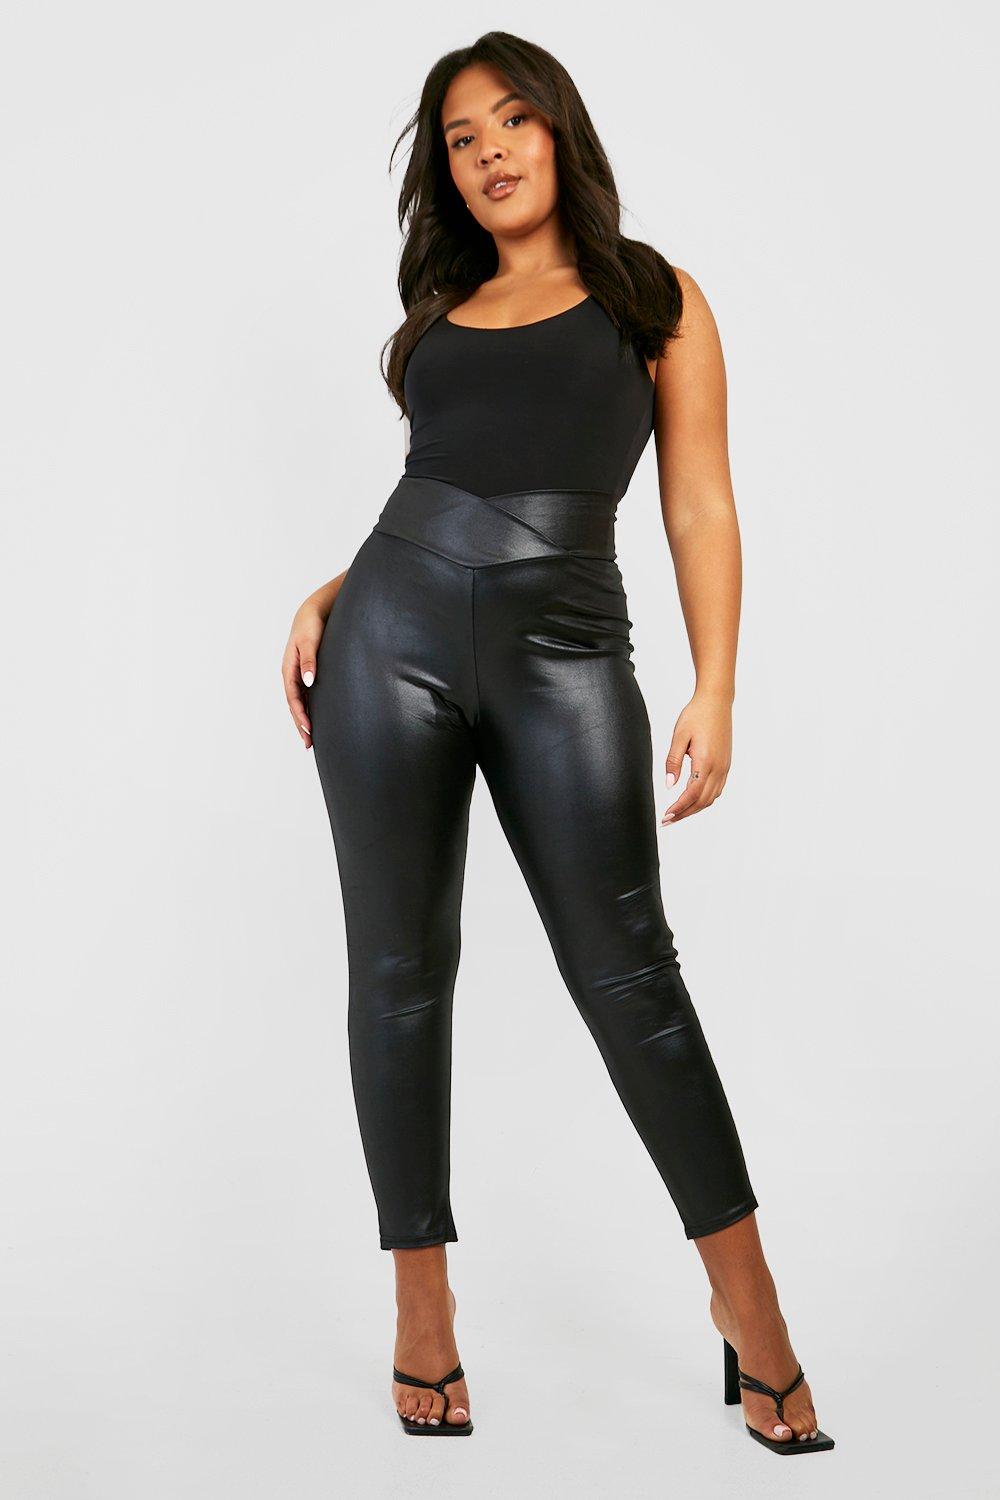 leggings plus size leather effect. leggings for curvy women all curves  signed babalú.the